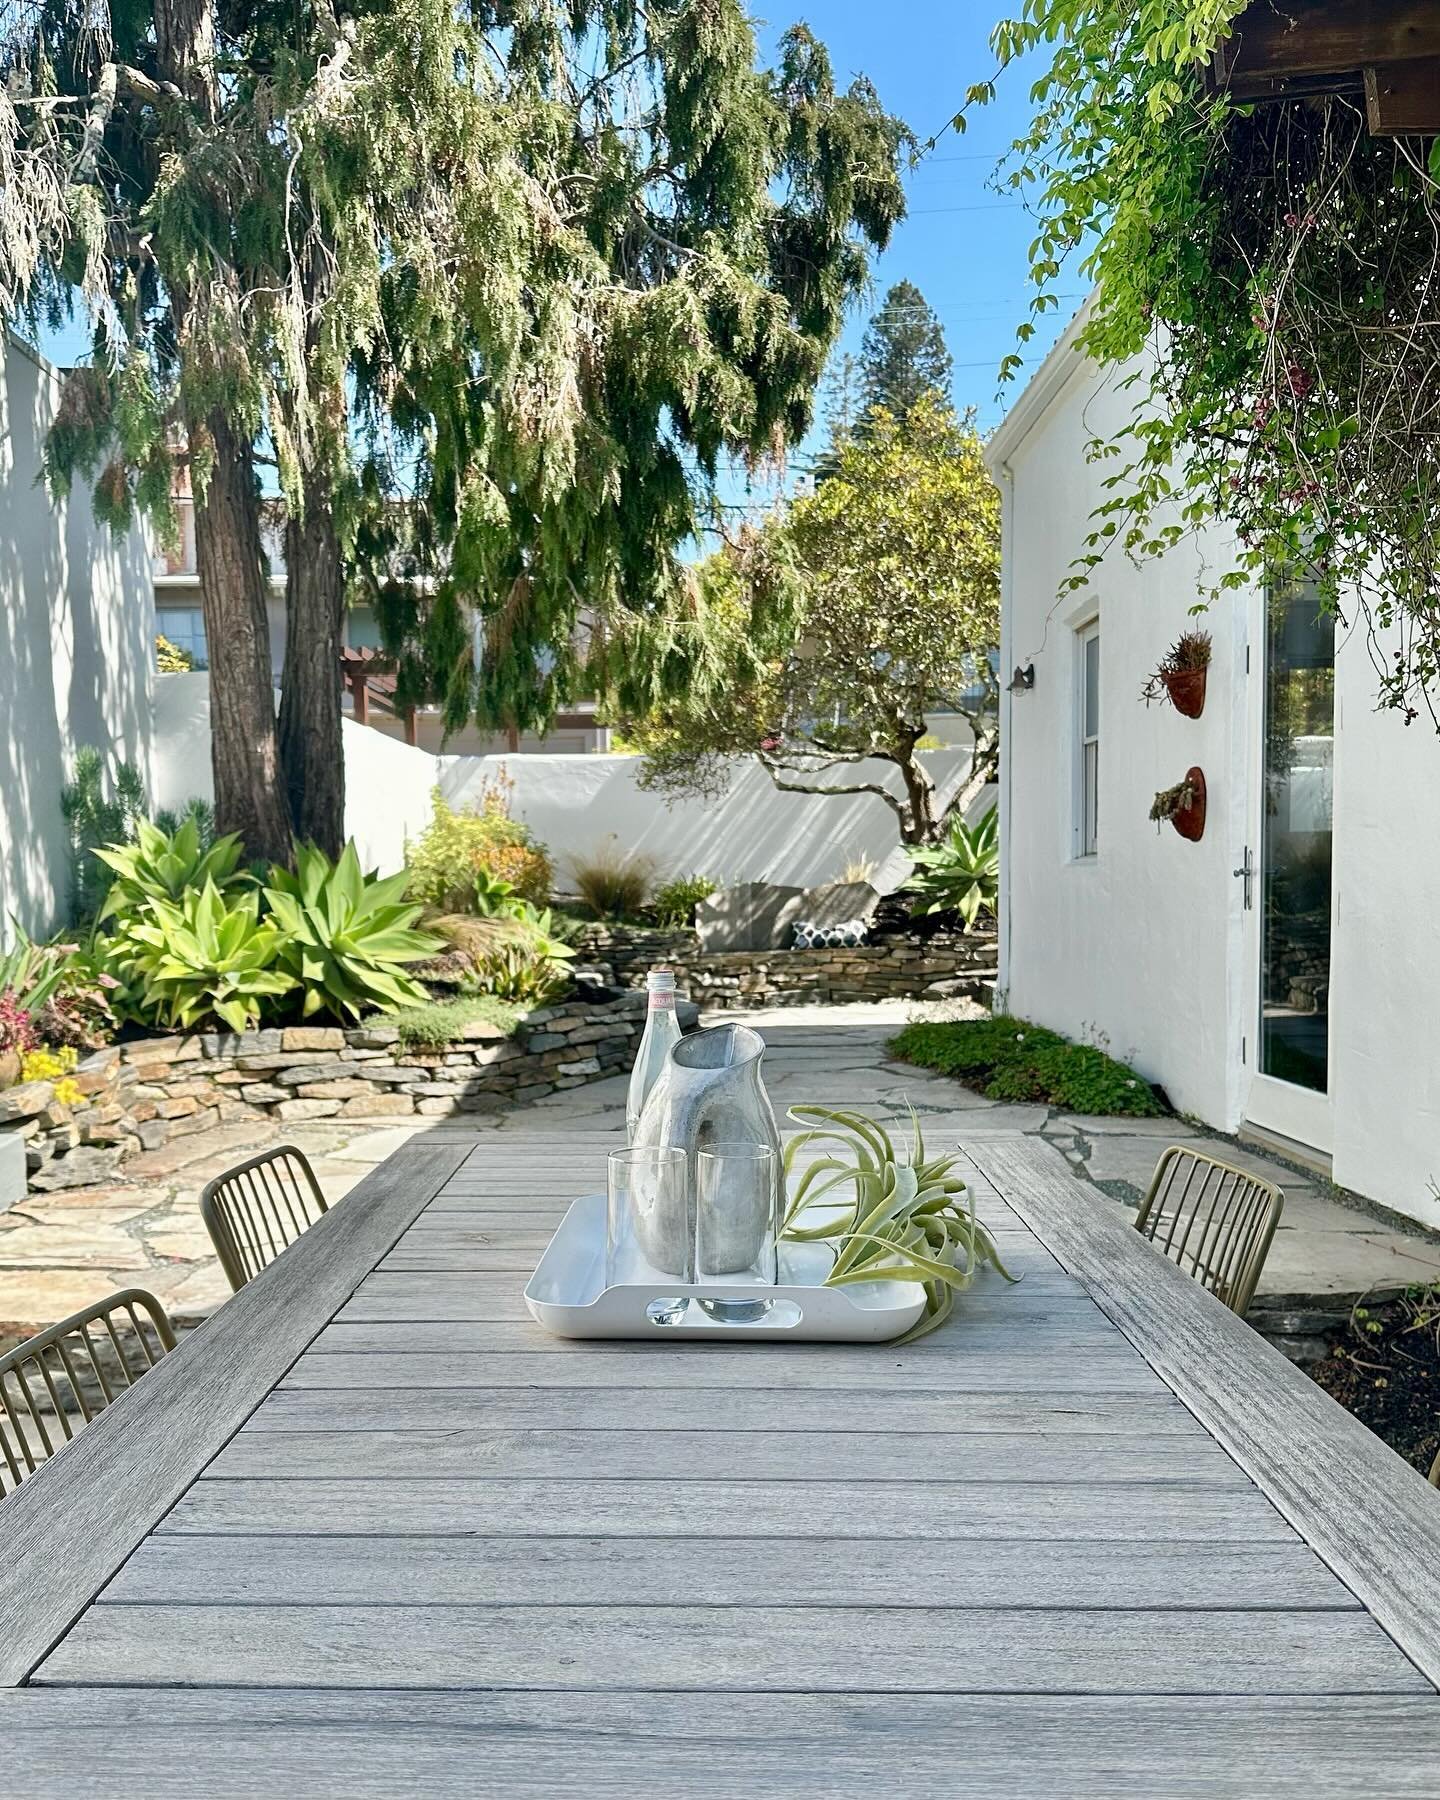 TGIF, PEOPLE 🥂 Can we get an Amen??? We are straight feeling this sunny weather and ready for summer ☀️ Had to share pics from this gorgeous garden we staged on Amy Drive listed by @michaelthompsonrealestate 👏🏻 No surprise this cutie is already pe